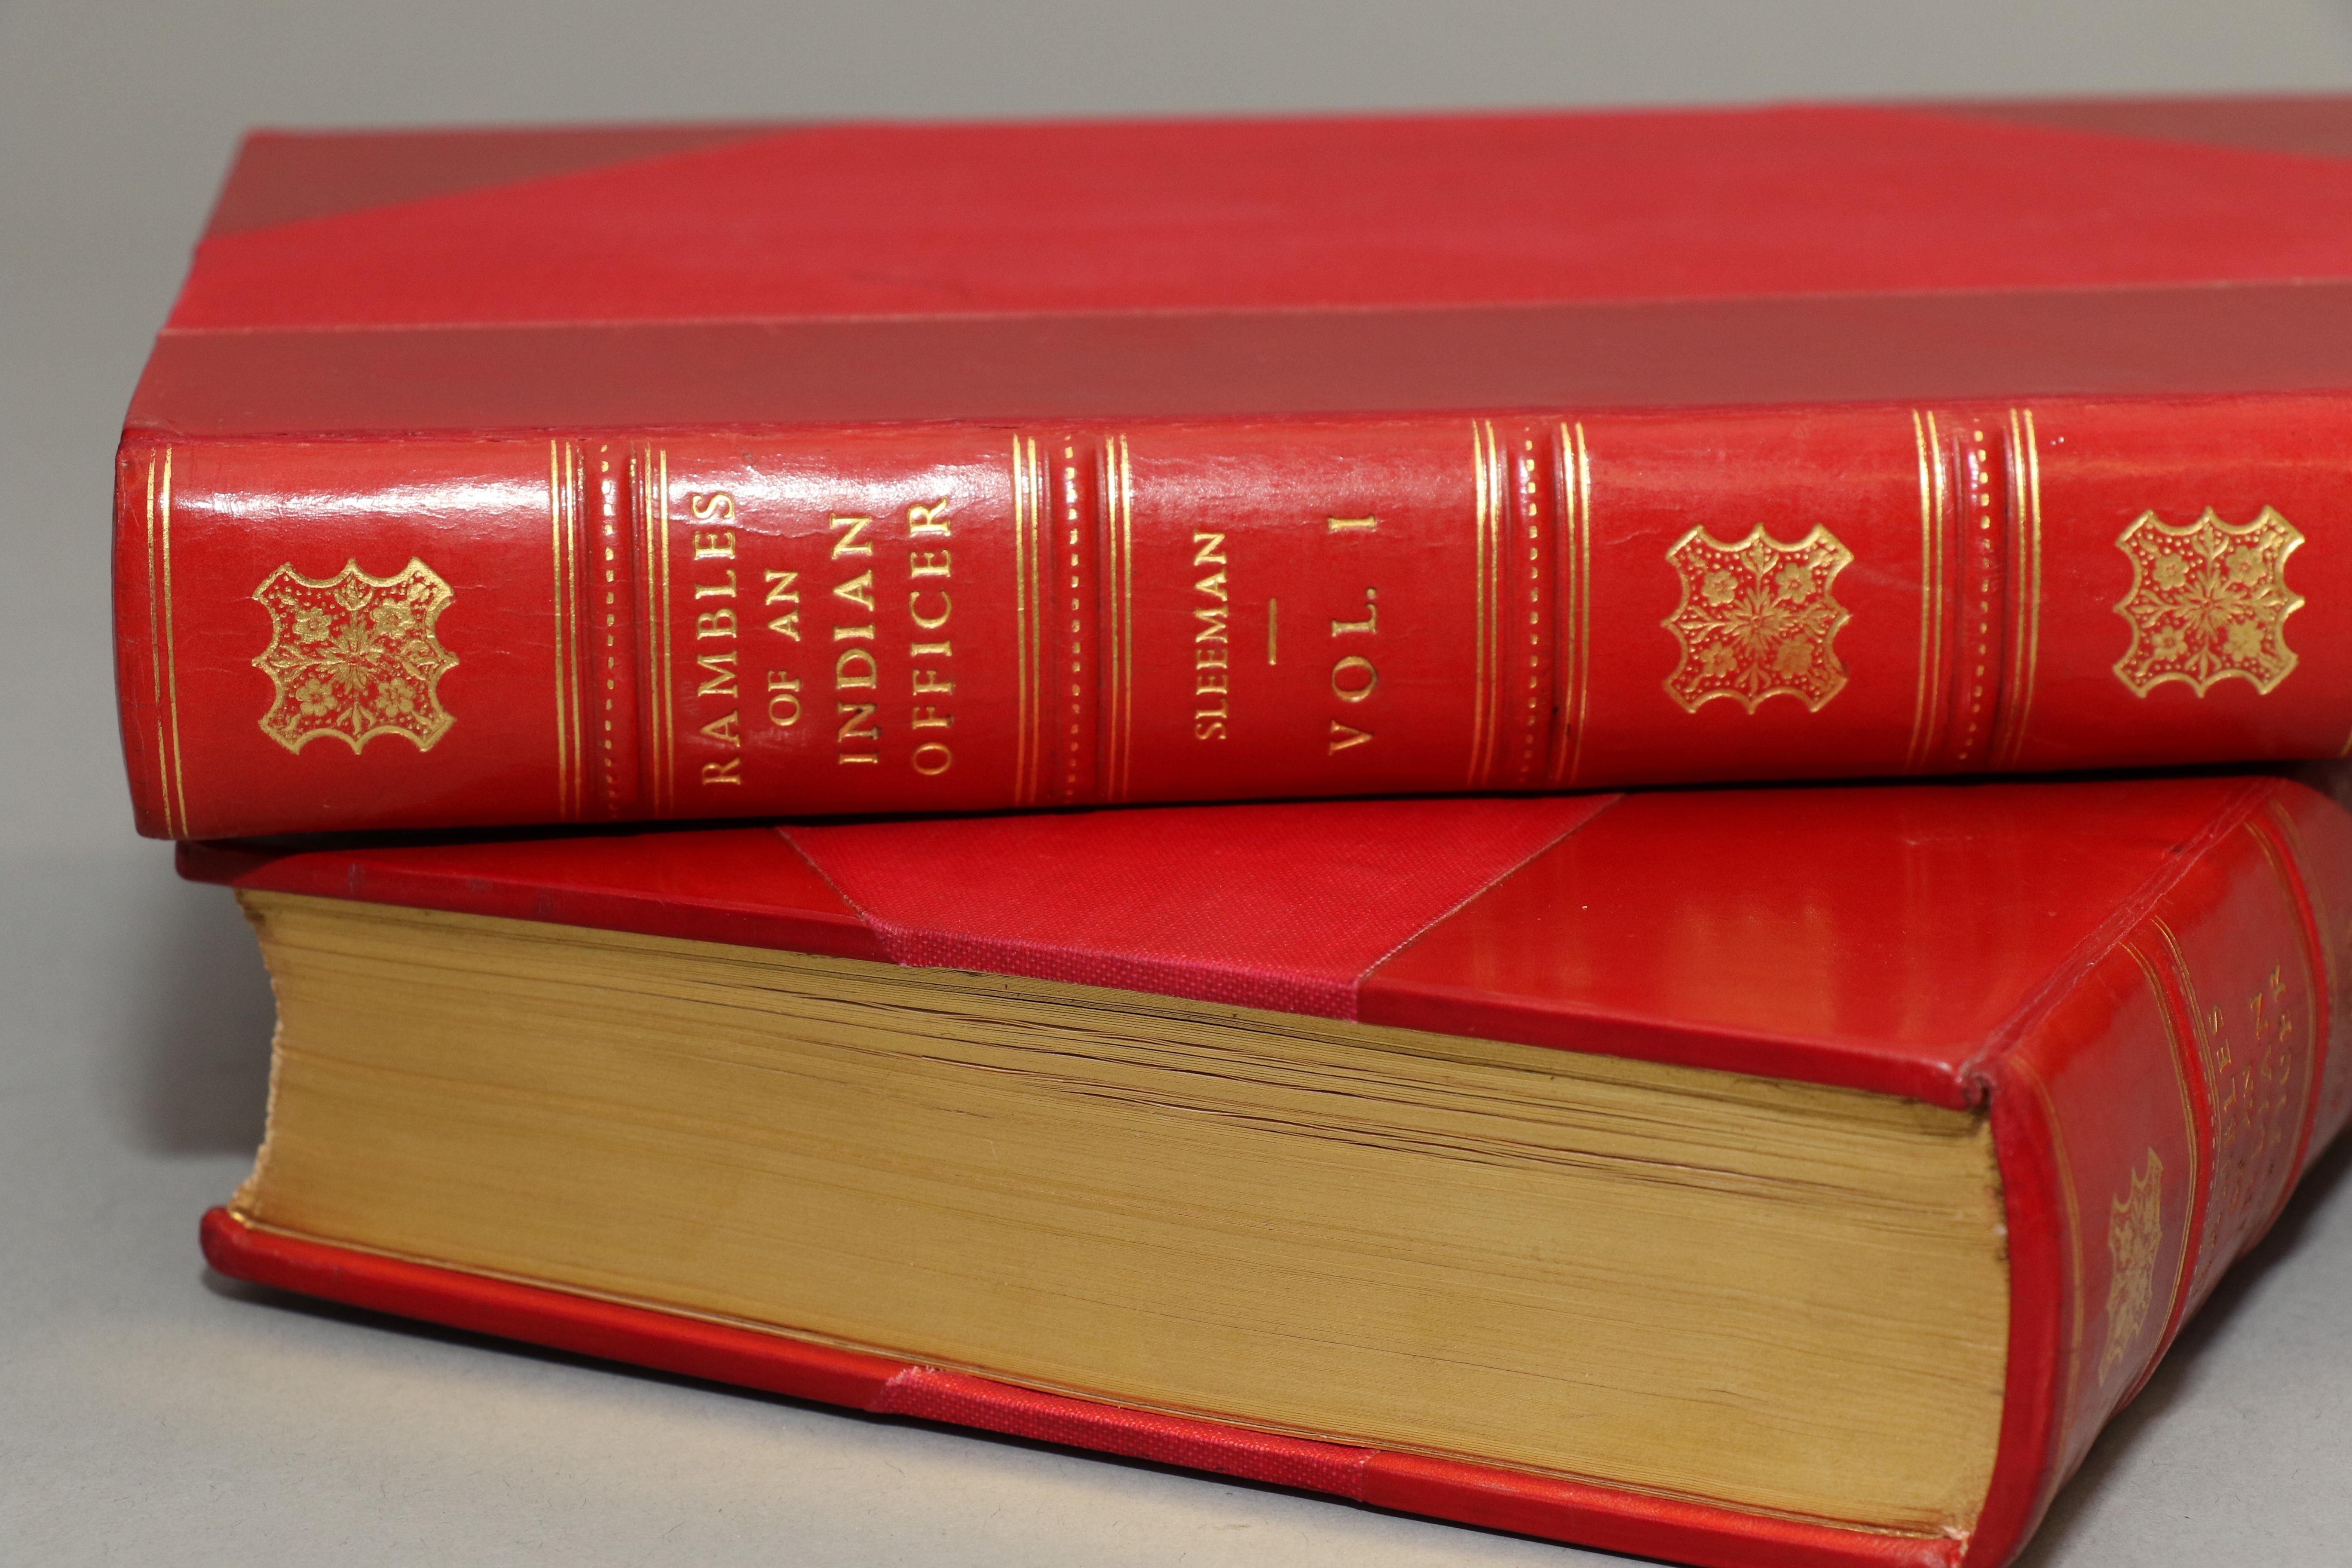 2 volumes. First edition! Bound in 3/4 red calf by Bayntun with top edges gilt, raised bands, & gilt panels. Ilustrated with 32 chromo lithographed plates & 9 original watercolors. Original covers bound in the rear.